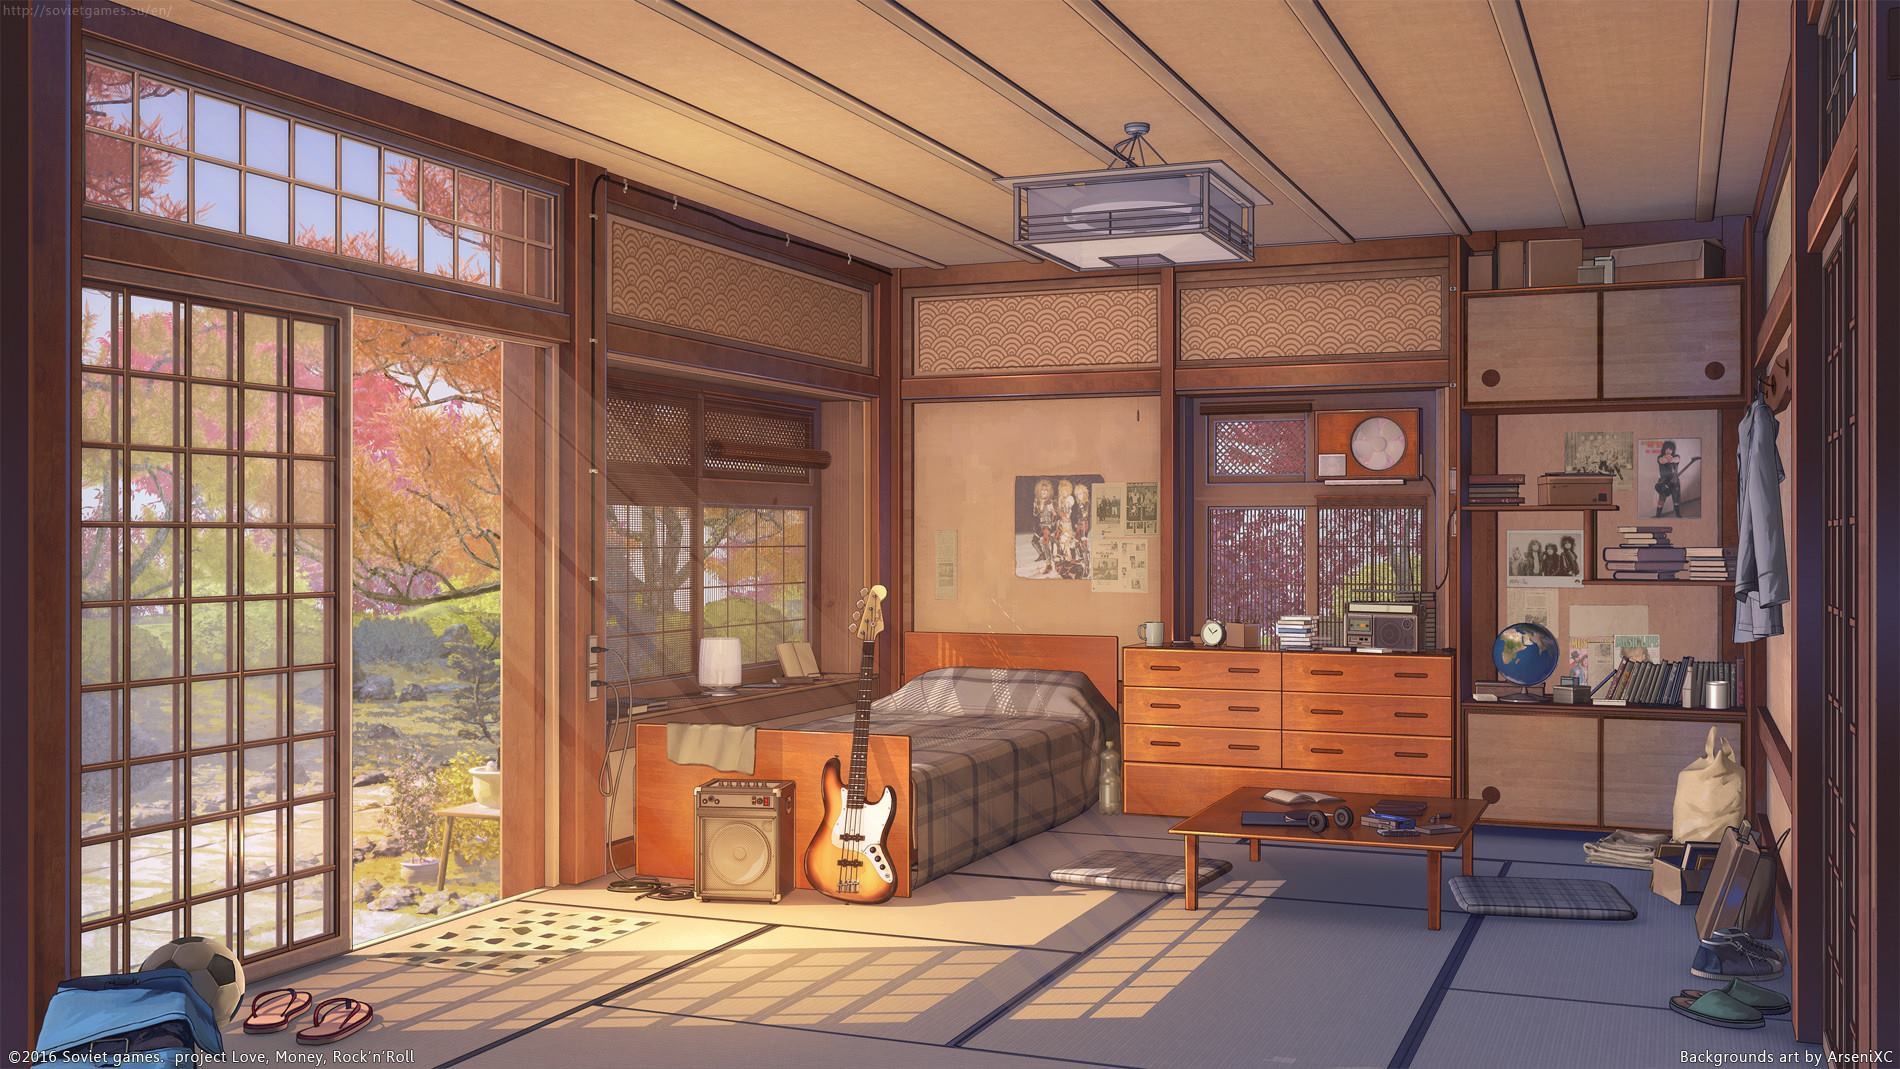 8,463 Anime House Images, Stock Photos & Vectors | Shutterstock